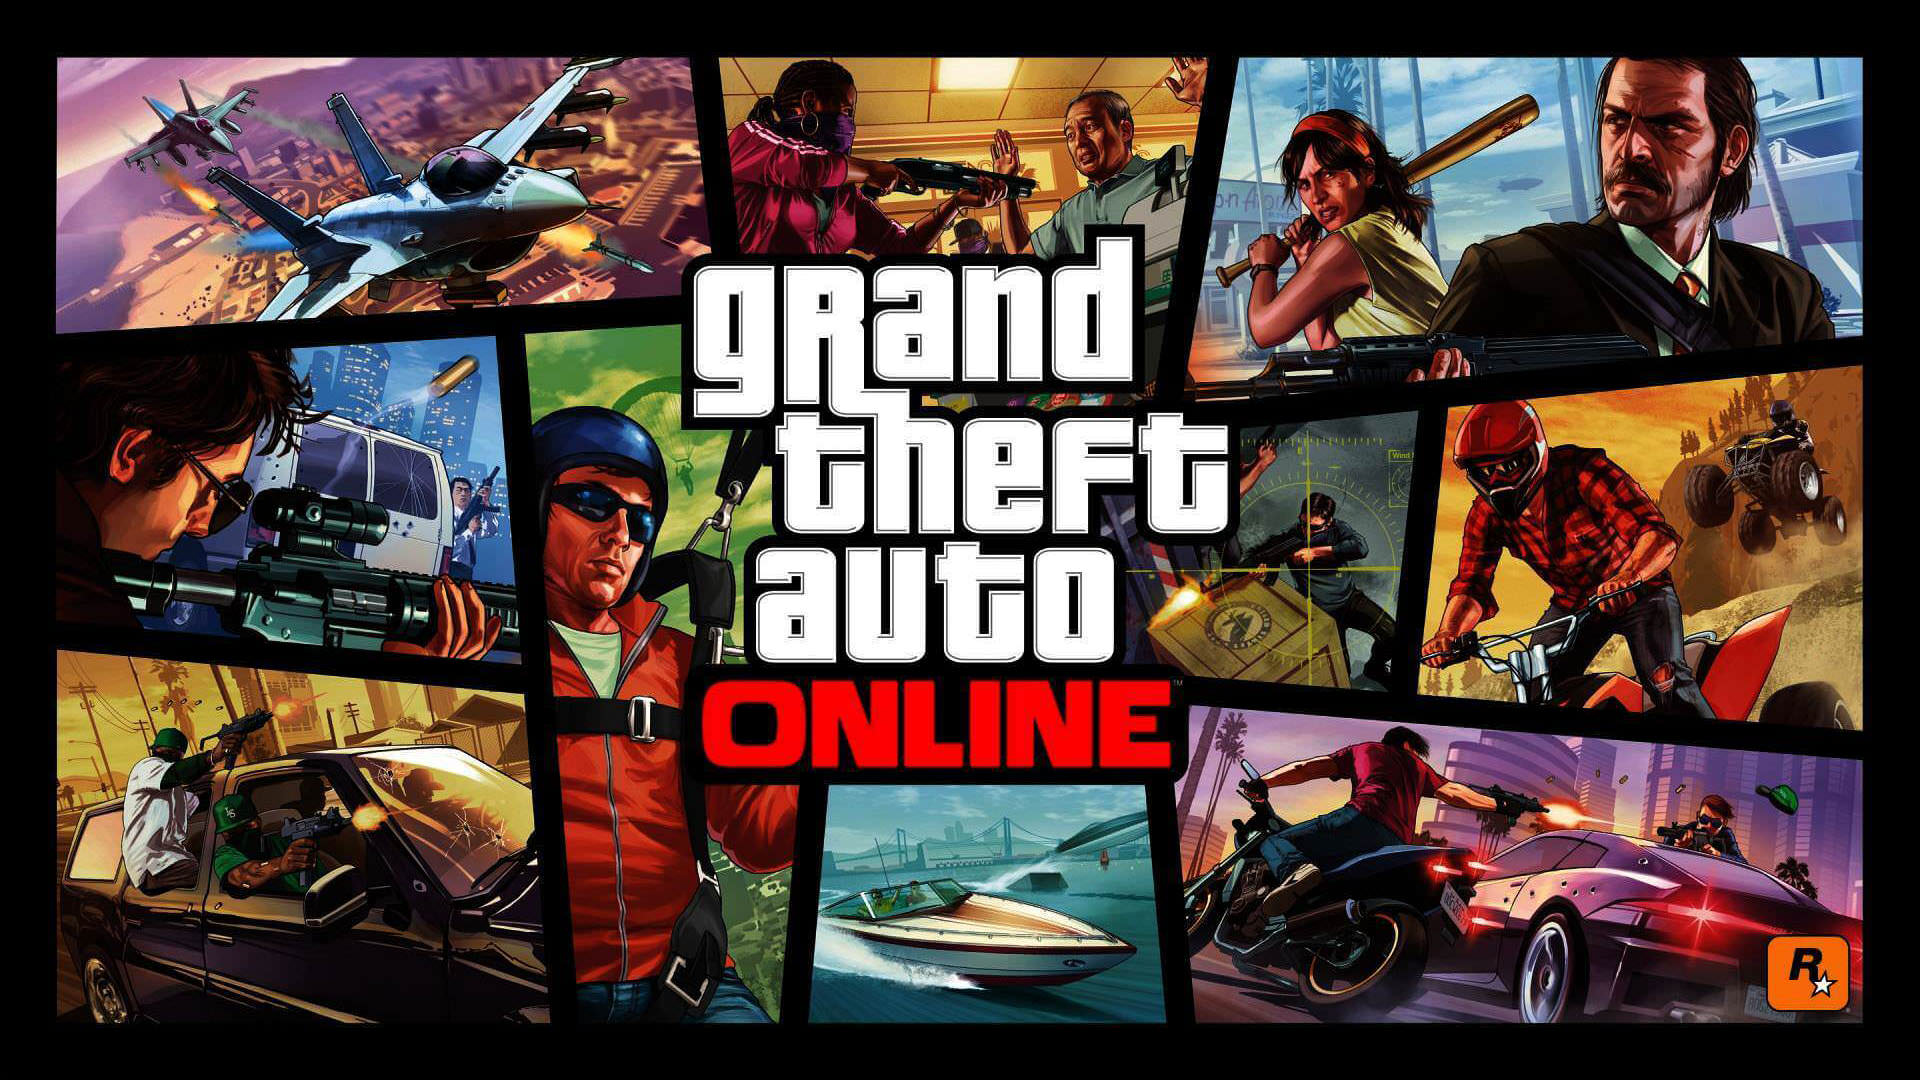 The online part of the GTA V game b